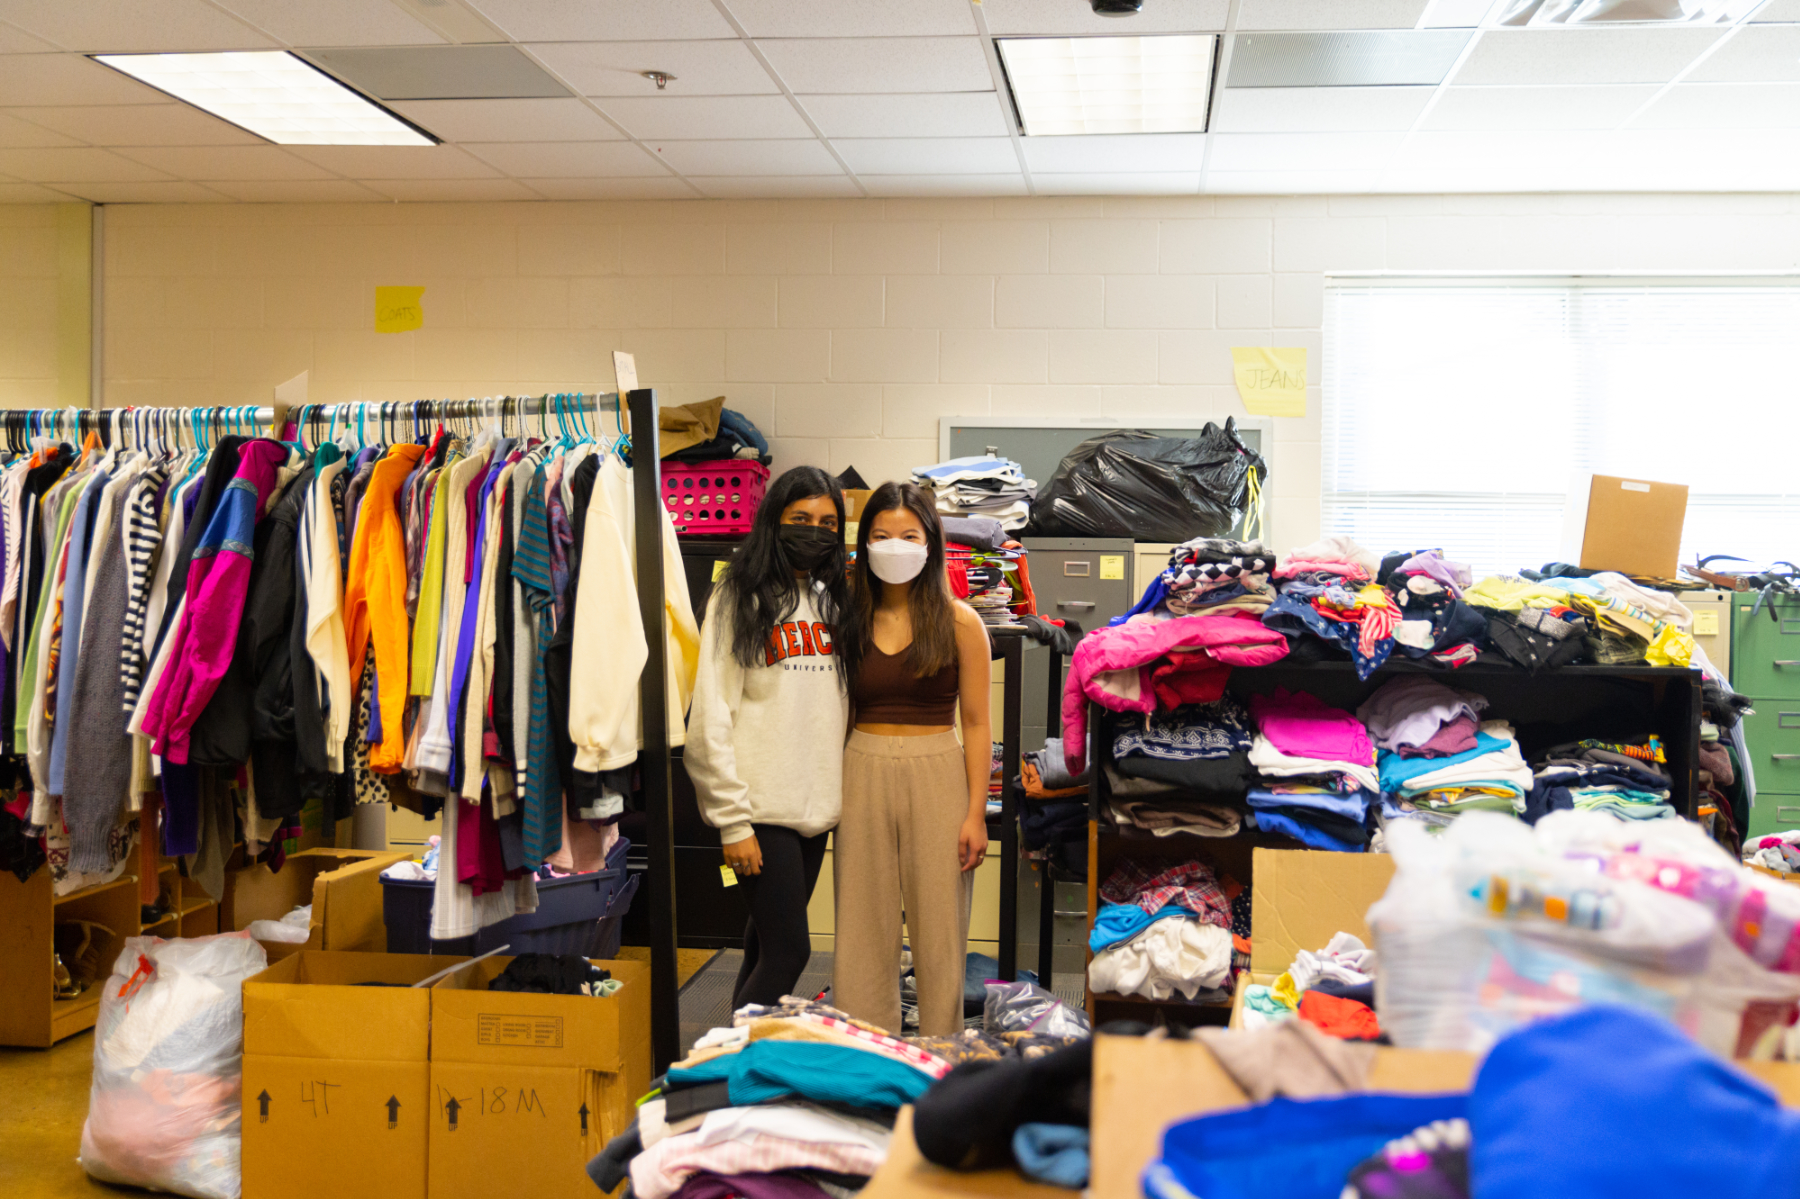 Two students stand among a room full of clothes